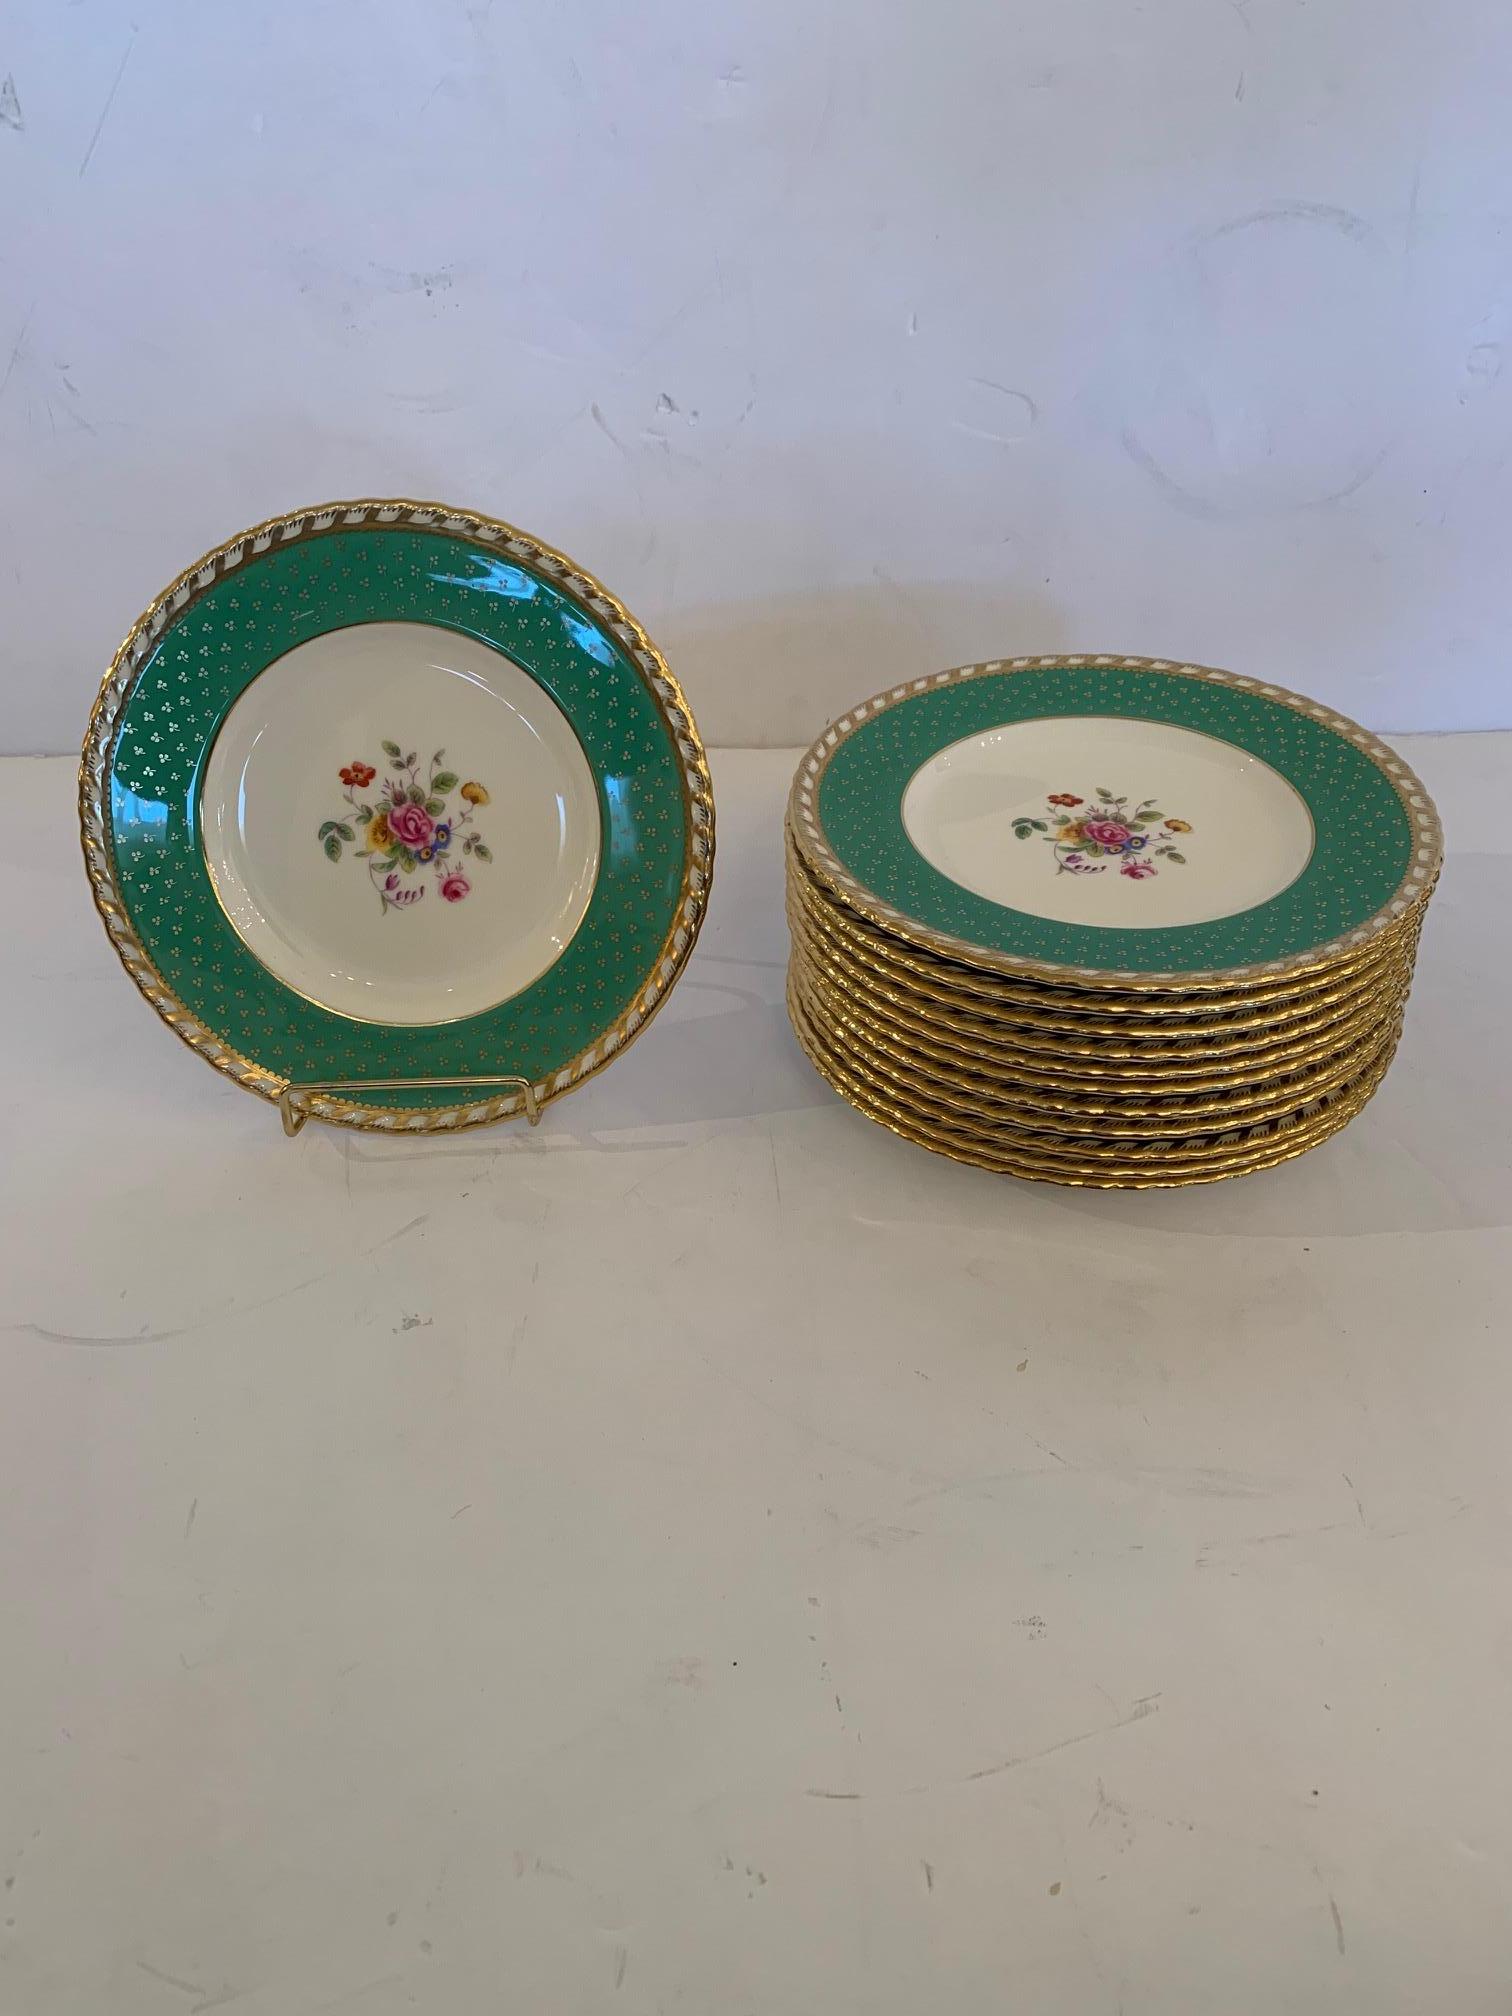 A gorgeous set of 12 dessert sized Tiffany china plates having celadon green and gold borders, cream centers and lovely floral central decoration.